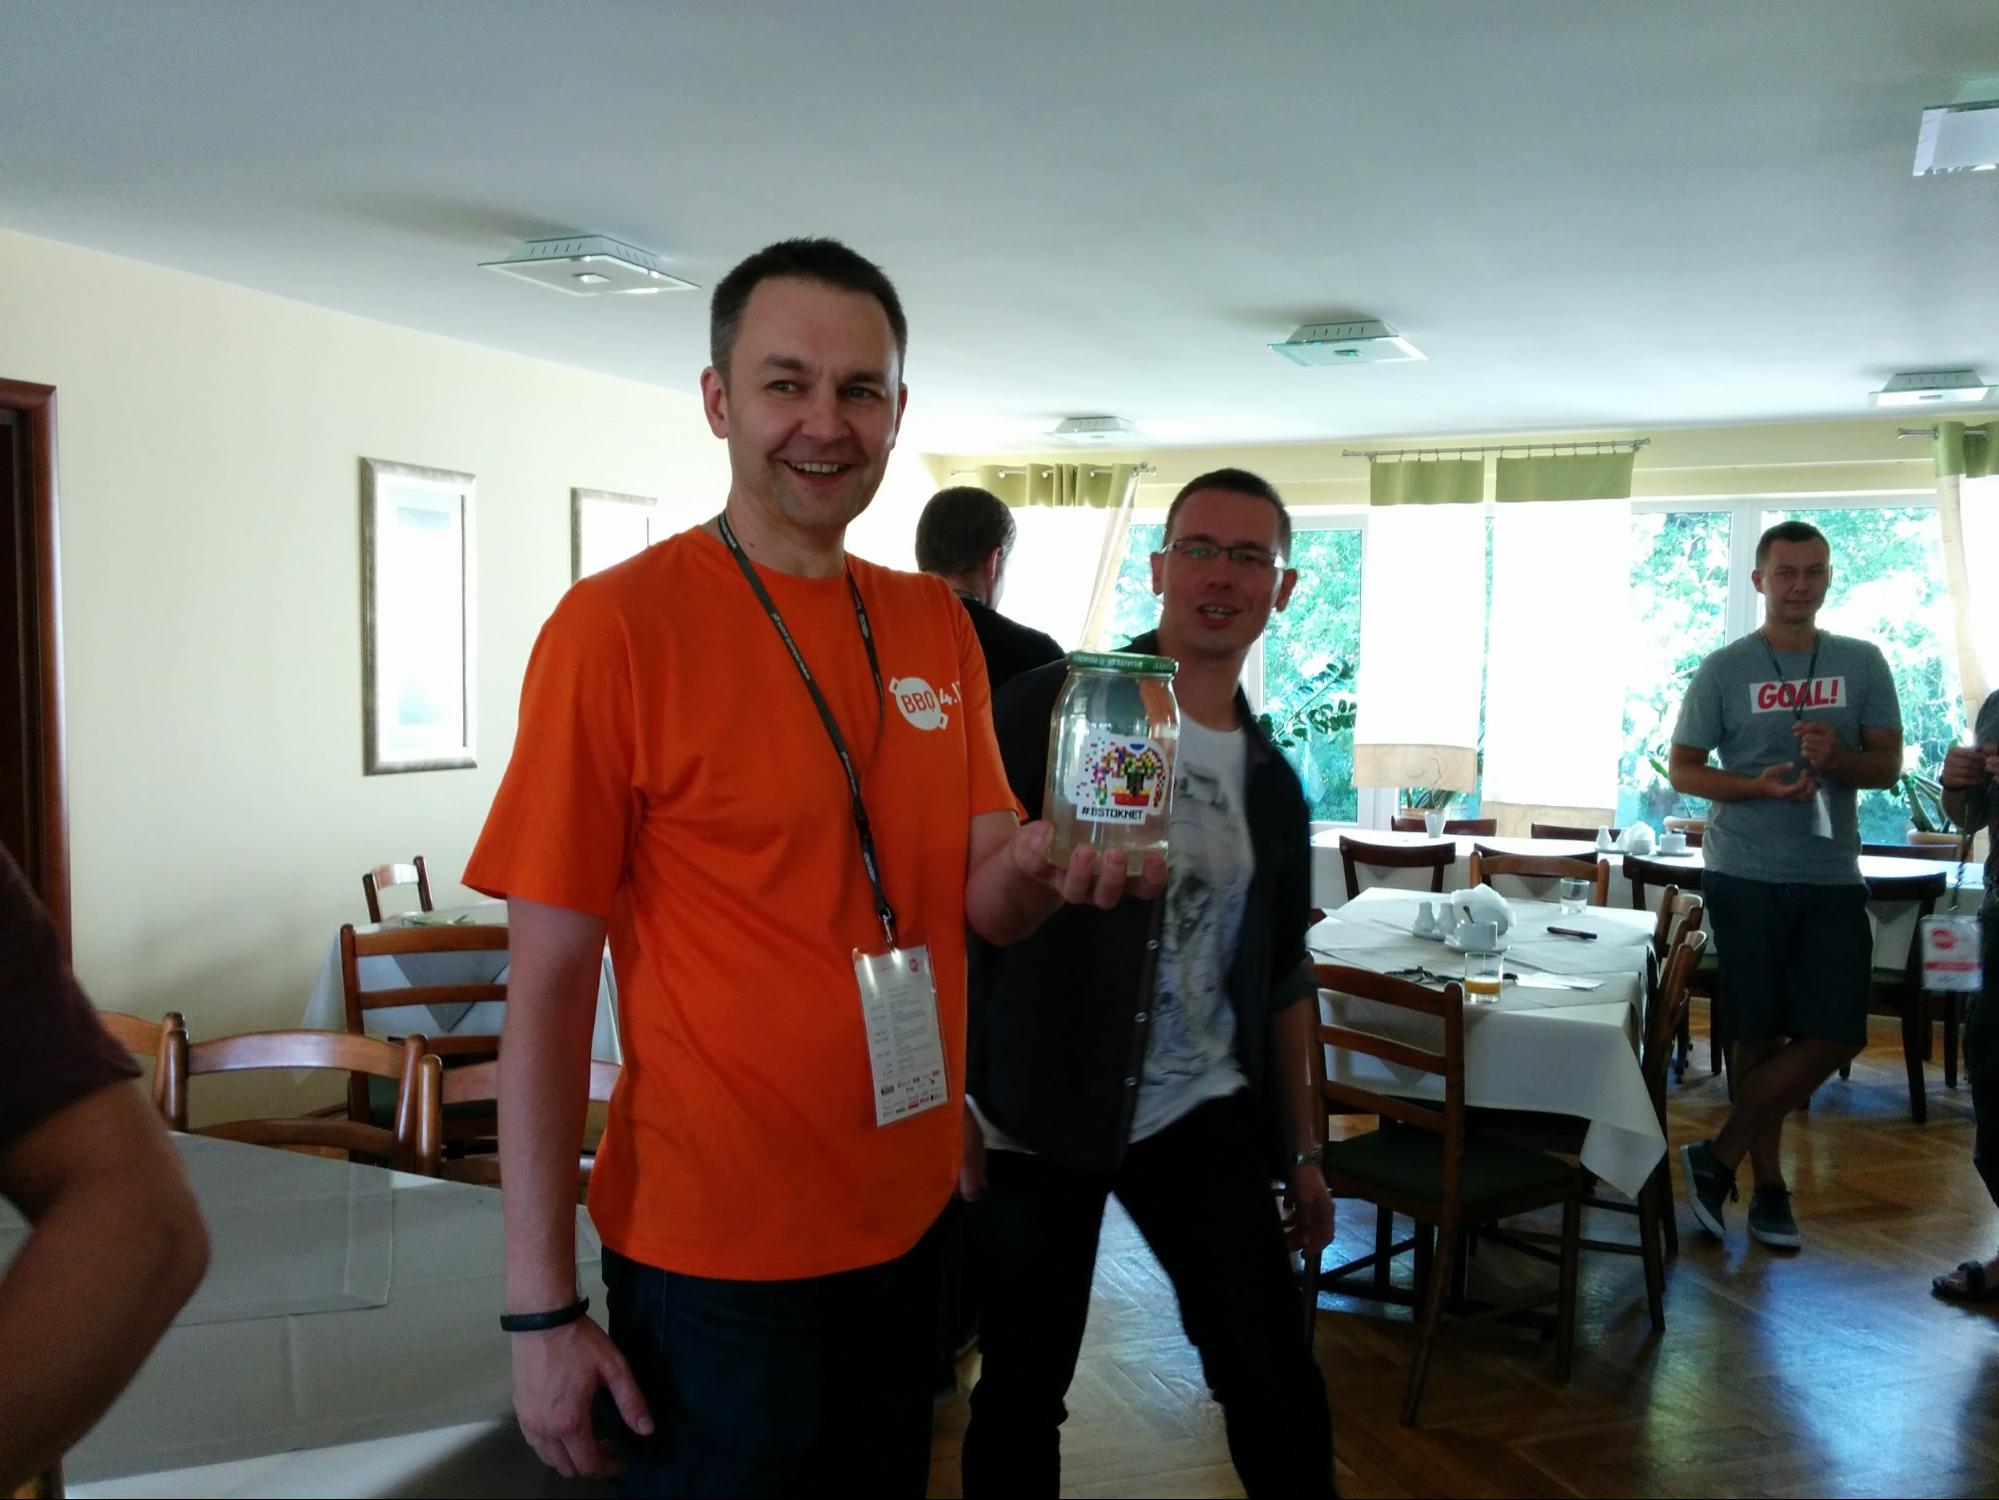 Speaker’s lunch and a mysterious and precious gift for Arek Benedykt given by Maciej Aniserowicz (It’s not a goldfish)